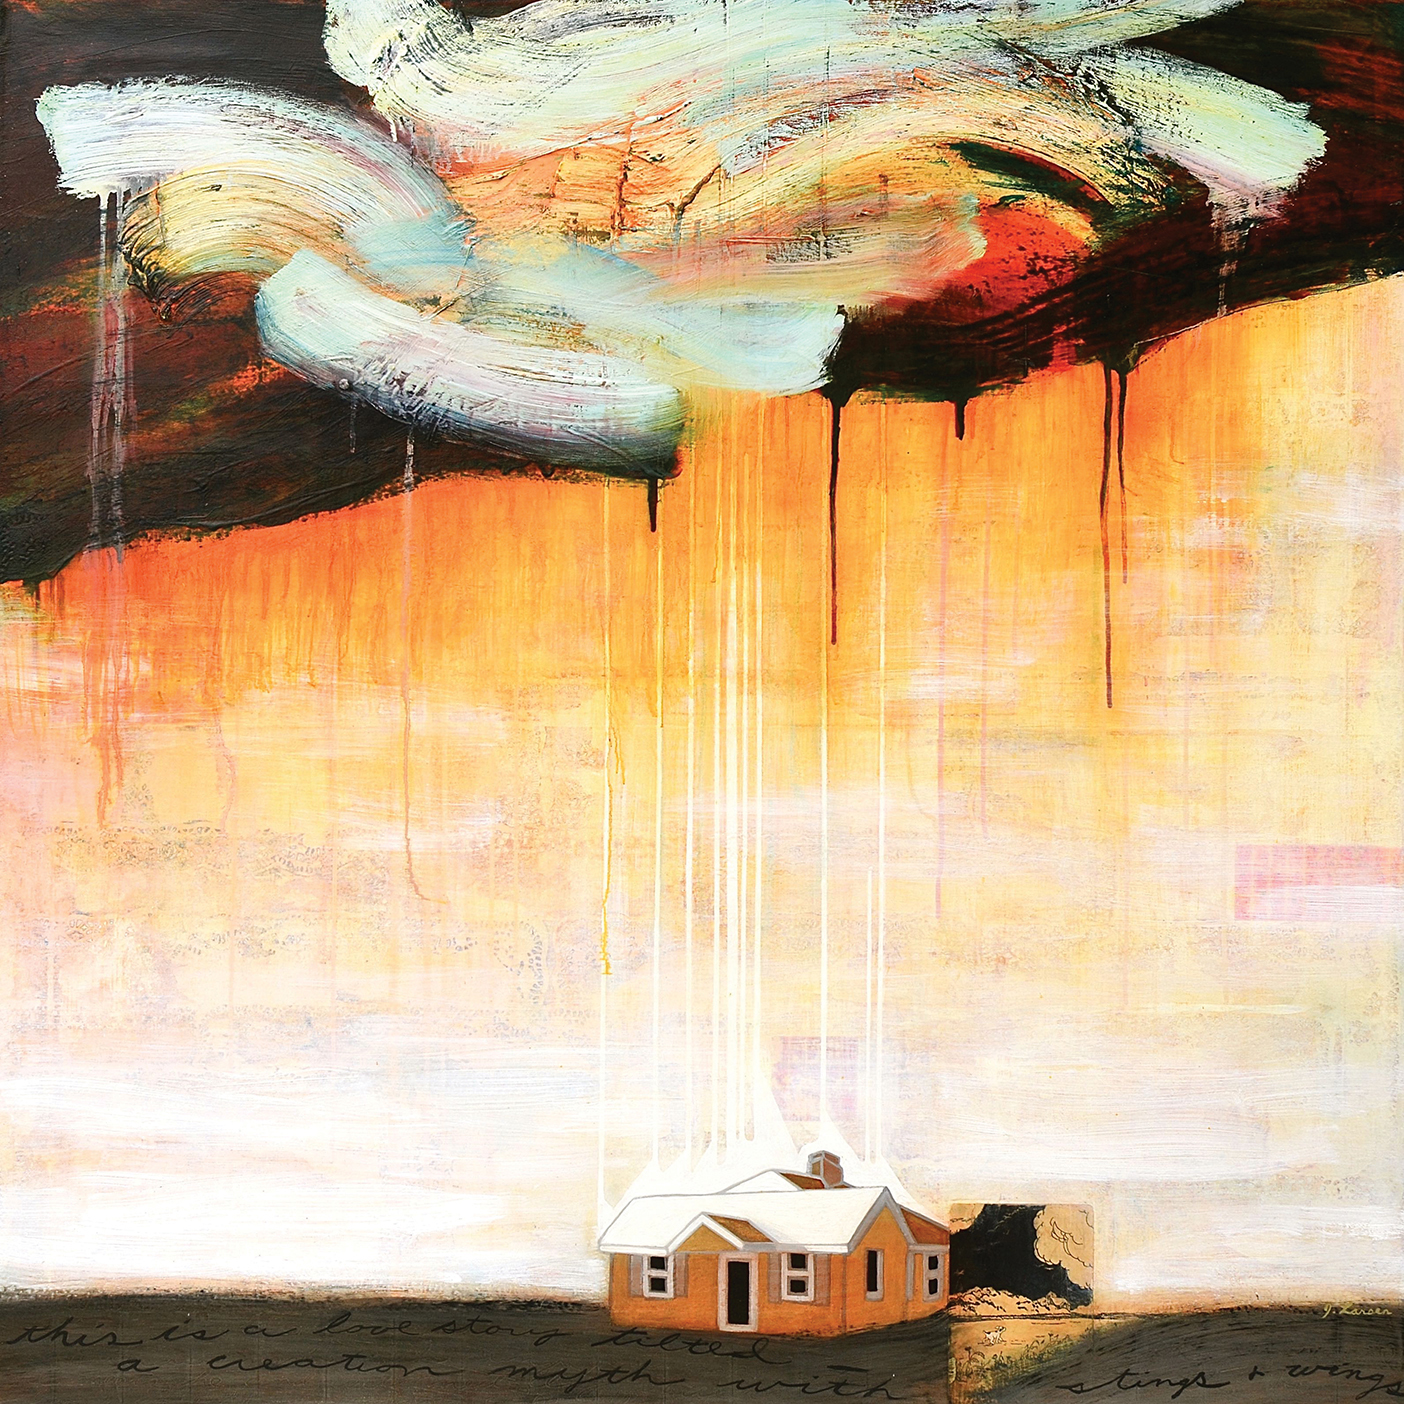 Painting of a house with threatening clouds above.